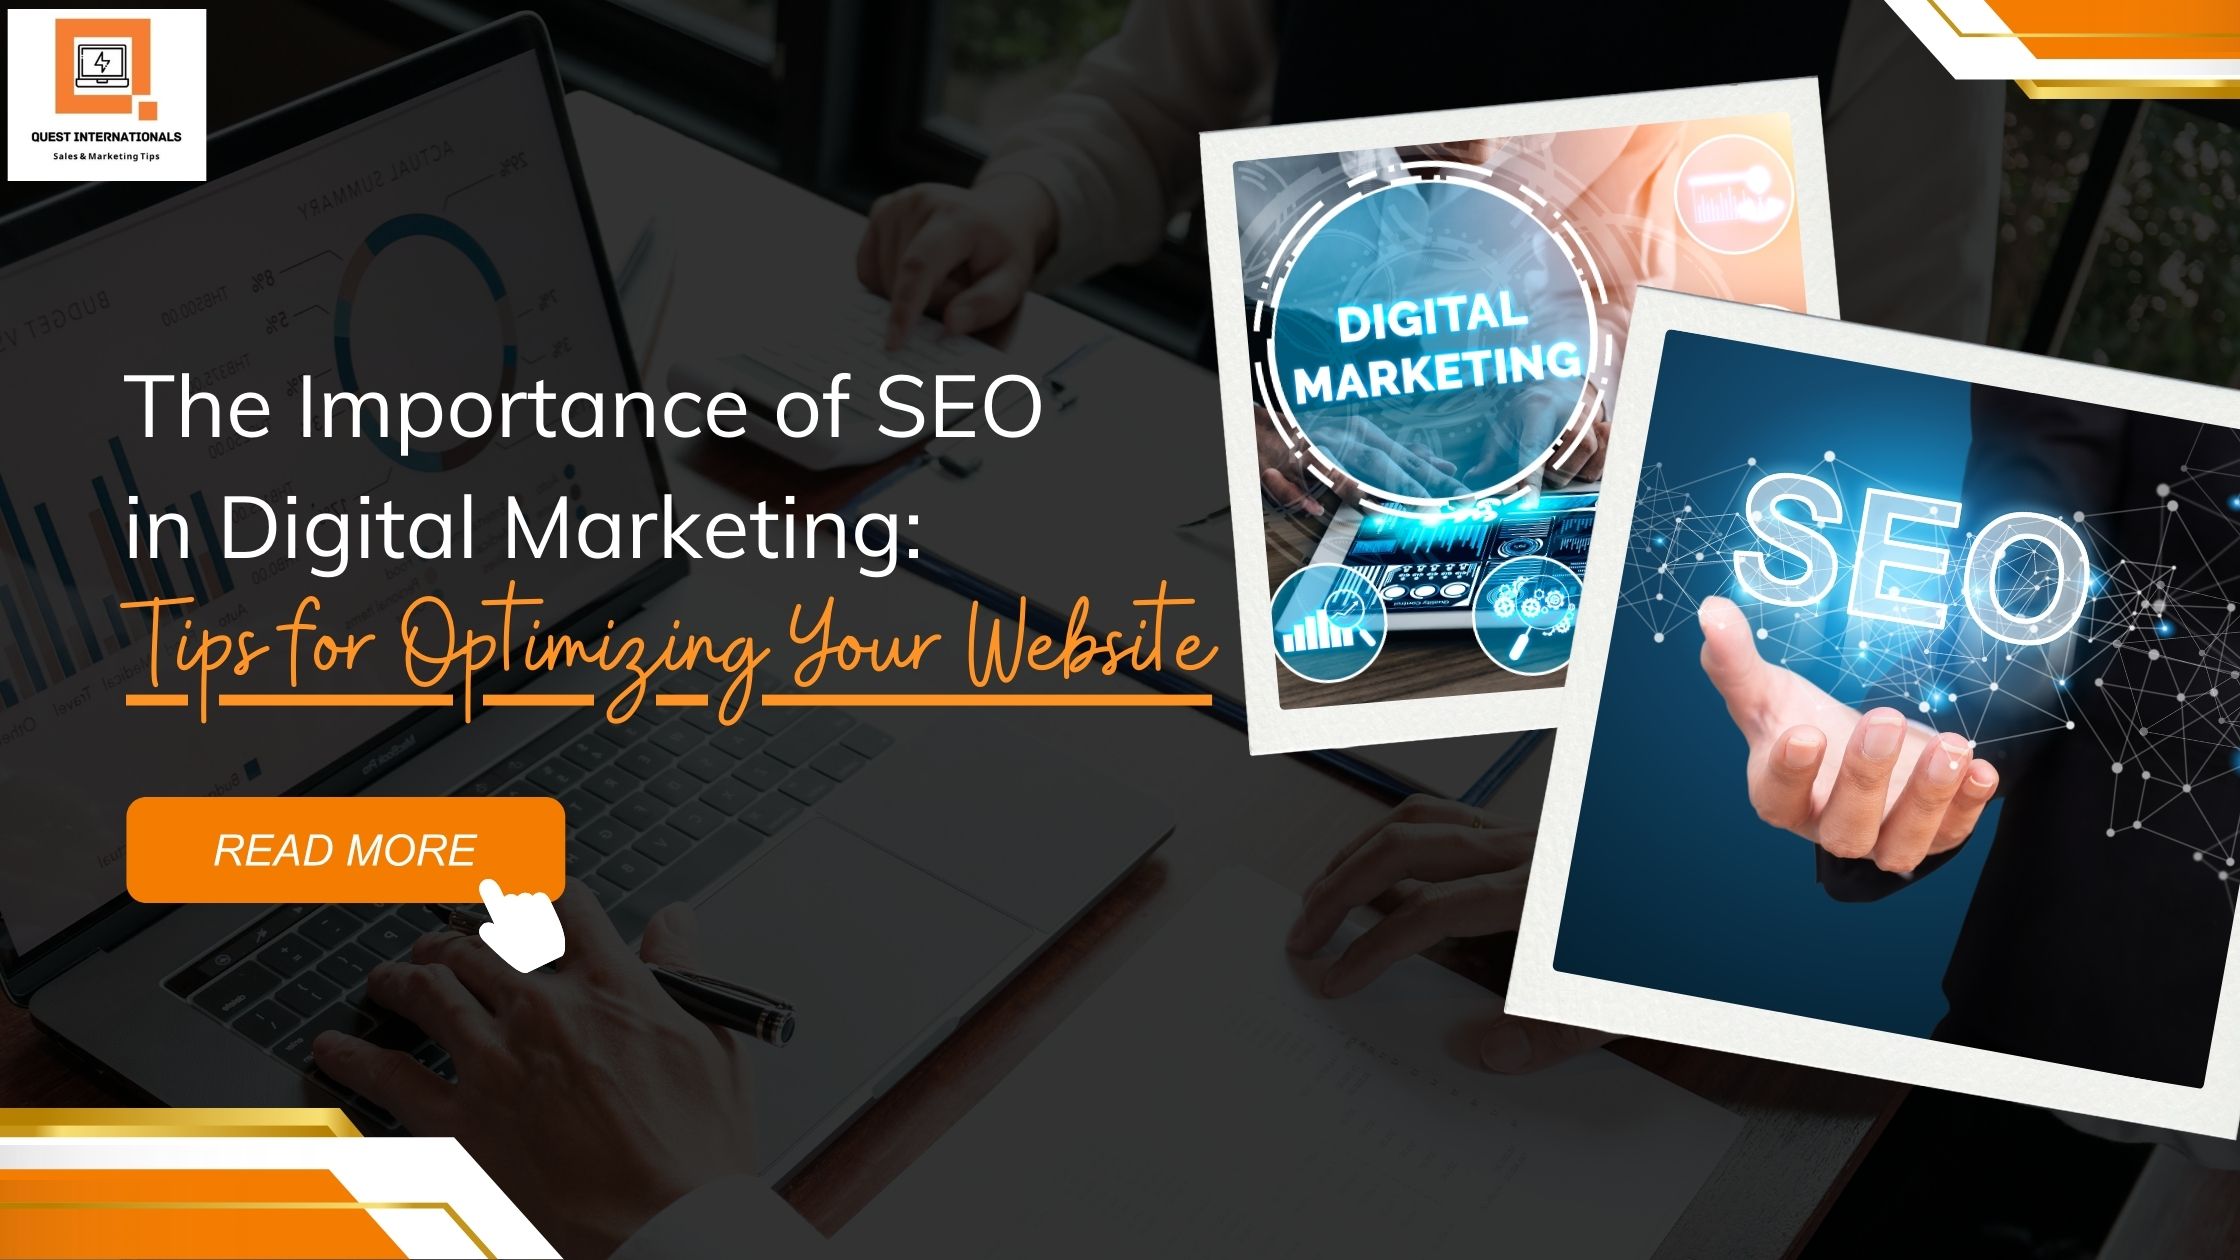 You are currently viewing The Importance of SEO in Digital Marketing: Tips for Optimizing Your Website